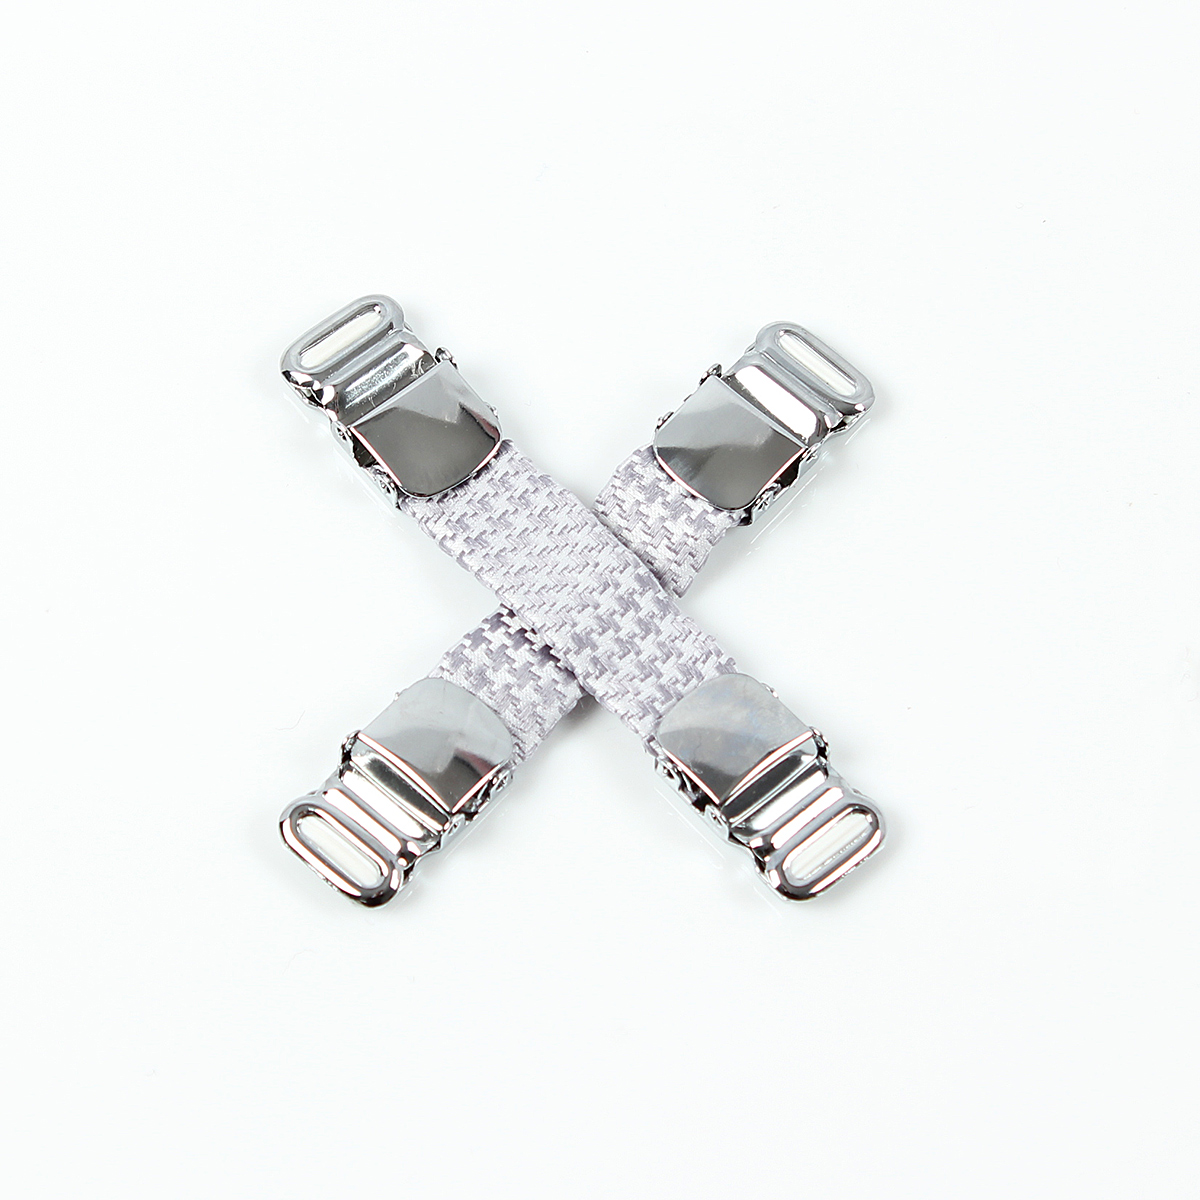 VAB-10 VANNERS Textile Shirt Garter Houndstooth Pattern Silver[Formal Accessories] Yamamoto(EXCY)